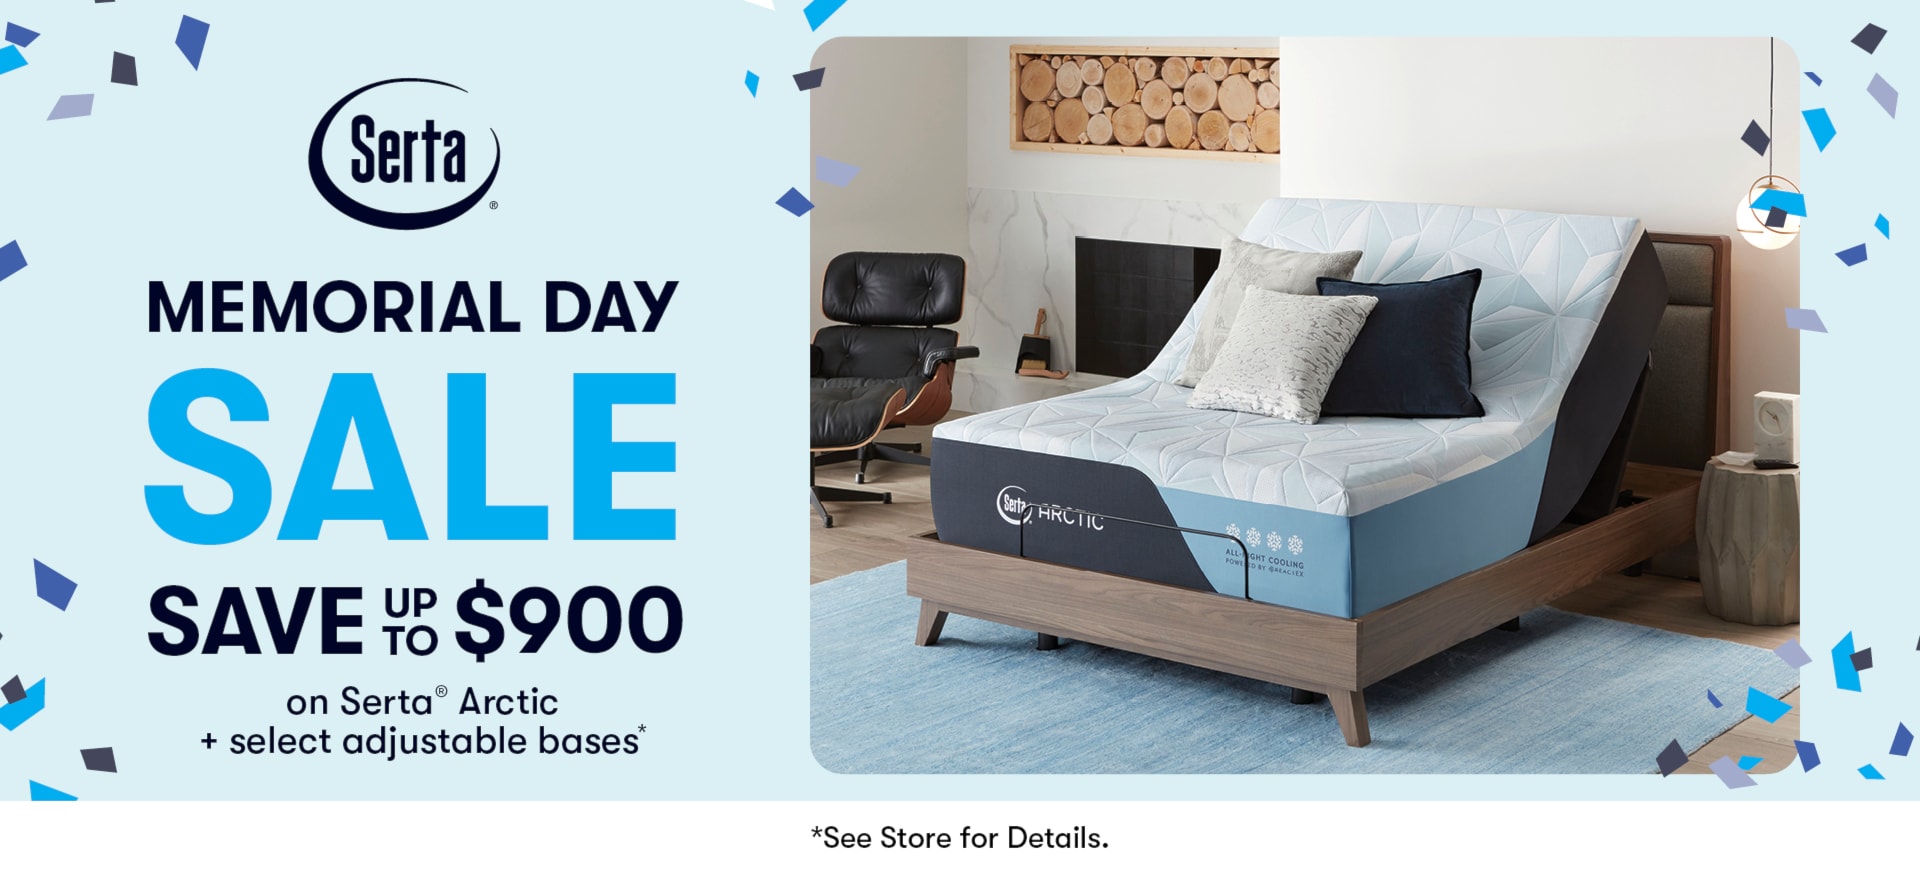 Serta Memorial Day Offer Save up to $900 on Artic